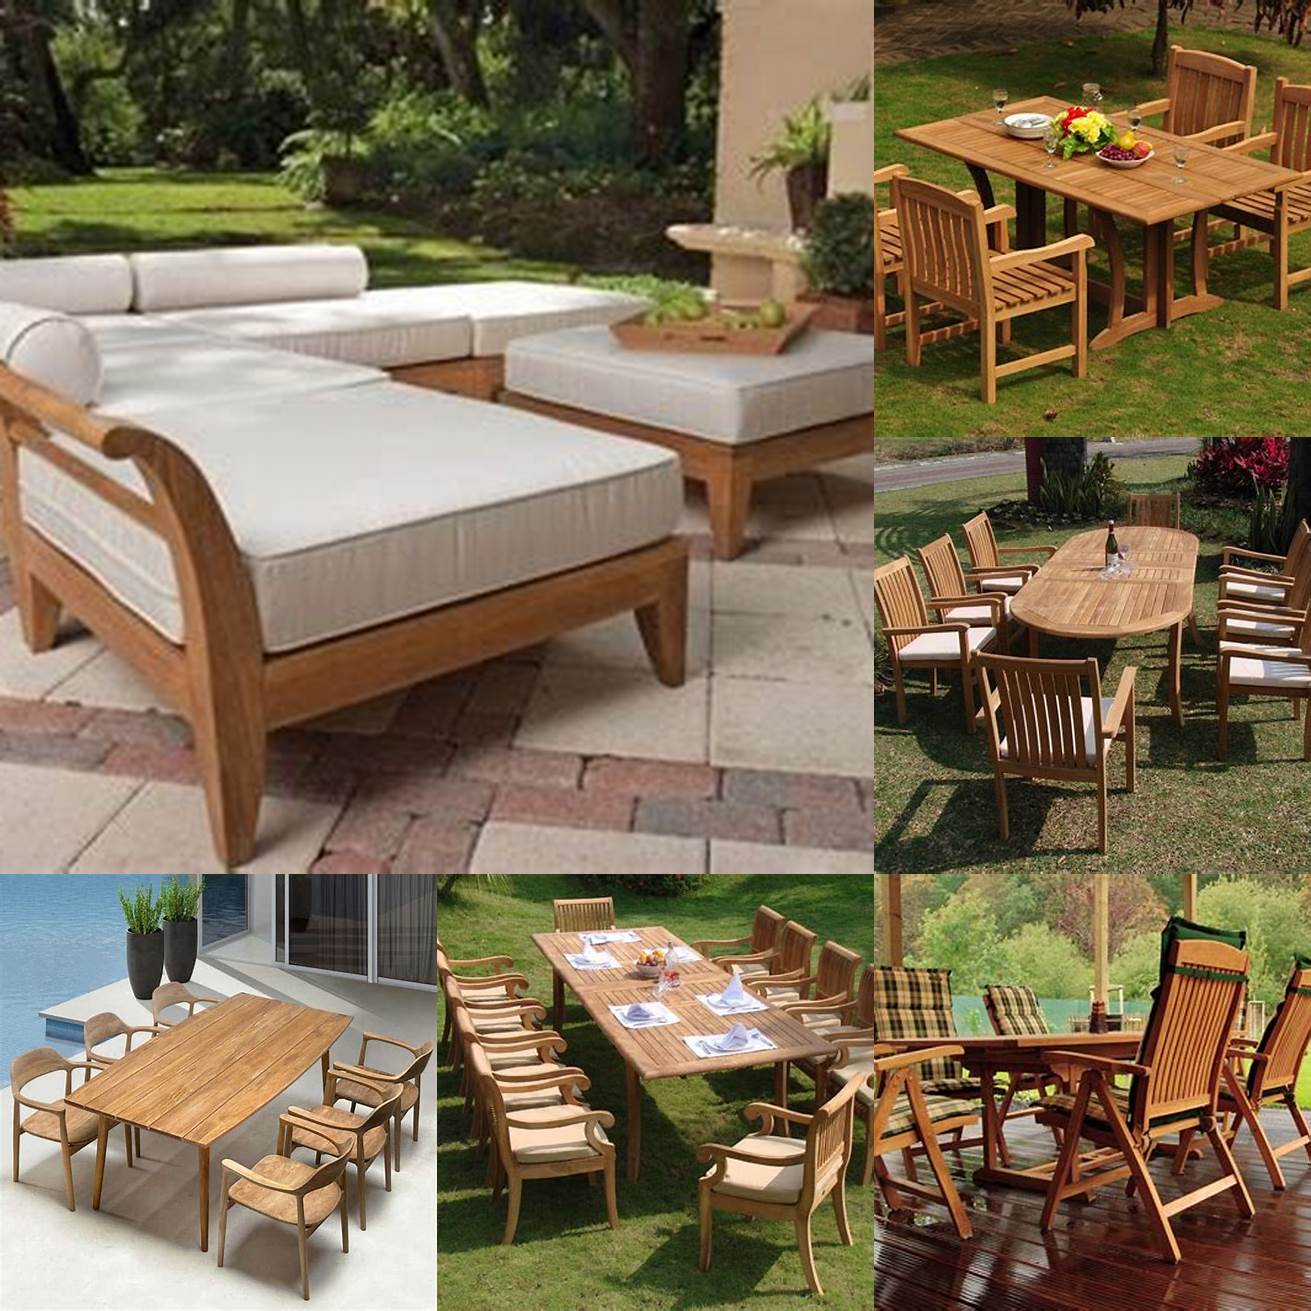 Do your research and know the market prices of teak furniture